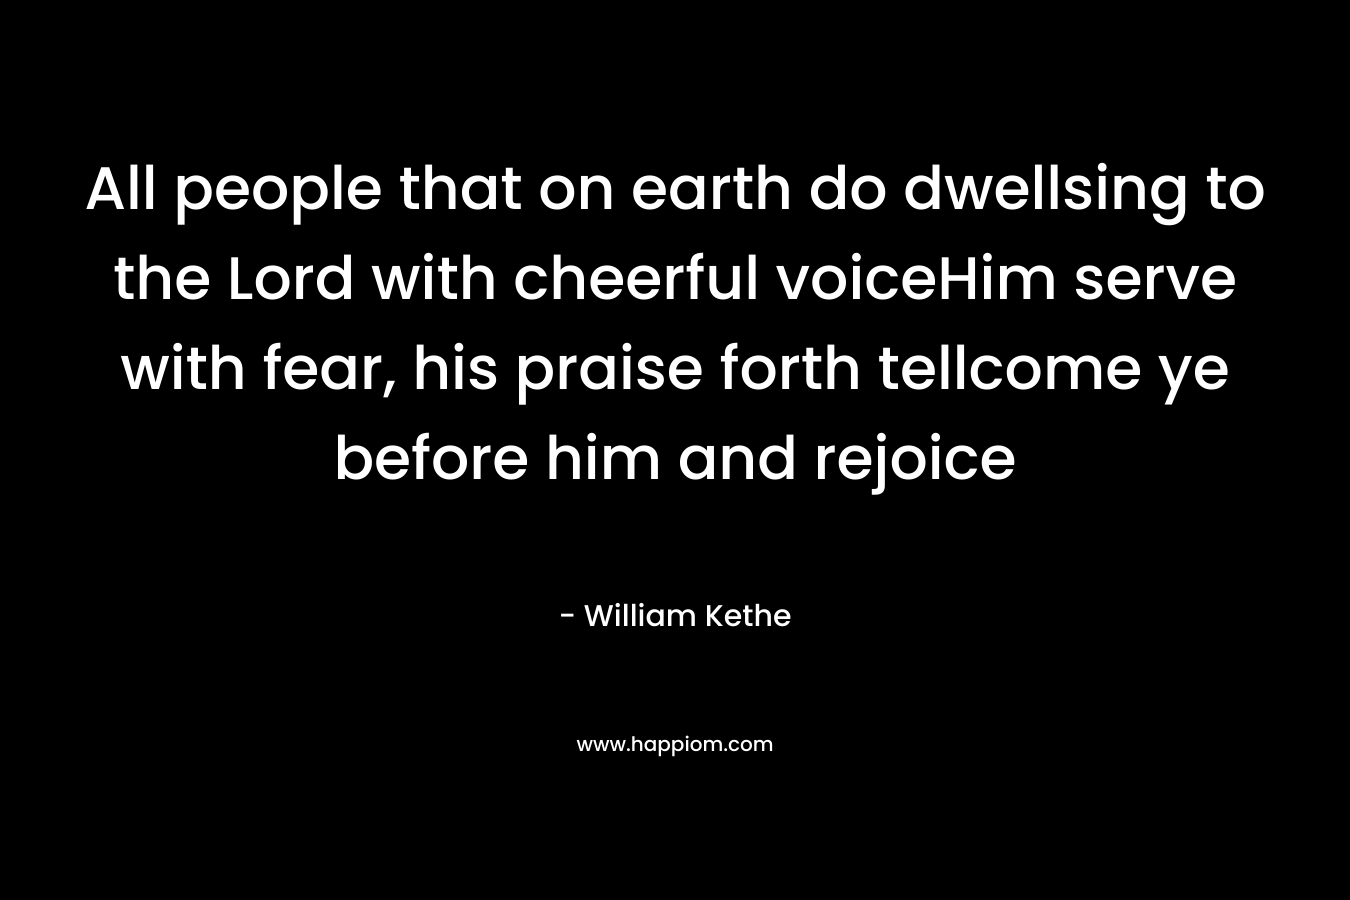 All people that on earth do dwellsing to the Lord with cheerful voiceHim serve with fear, his praise forth tellcome ye before him and rejoice – William Kethe